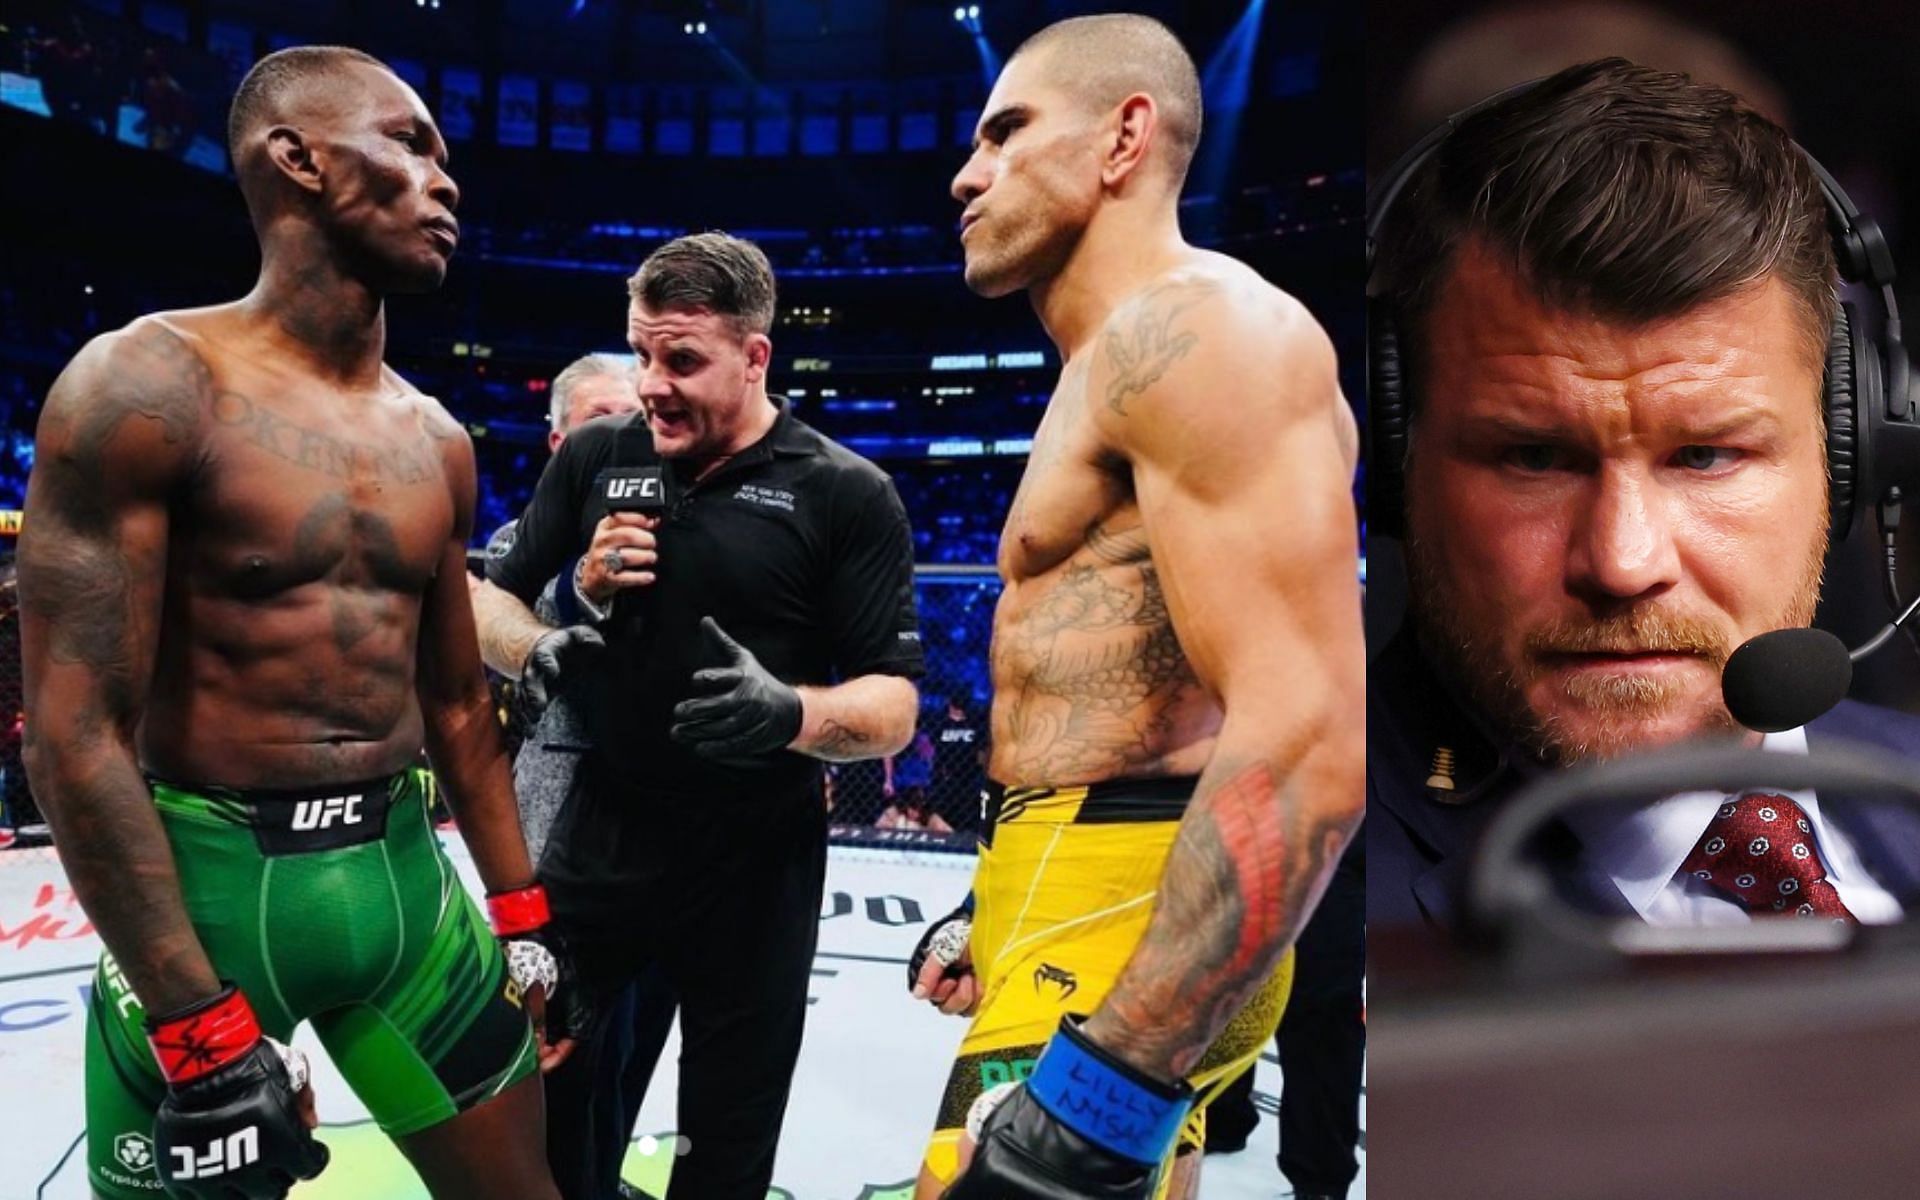 Israel Adesanya, Marc Goddard, and Alex Pereira (left), and Michael Bisping (right). [Images courtesy: left image from Instagram @marcgoddard_uk and right image from Getty Images]